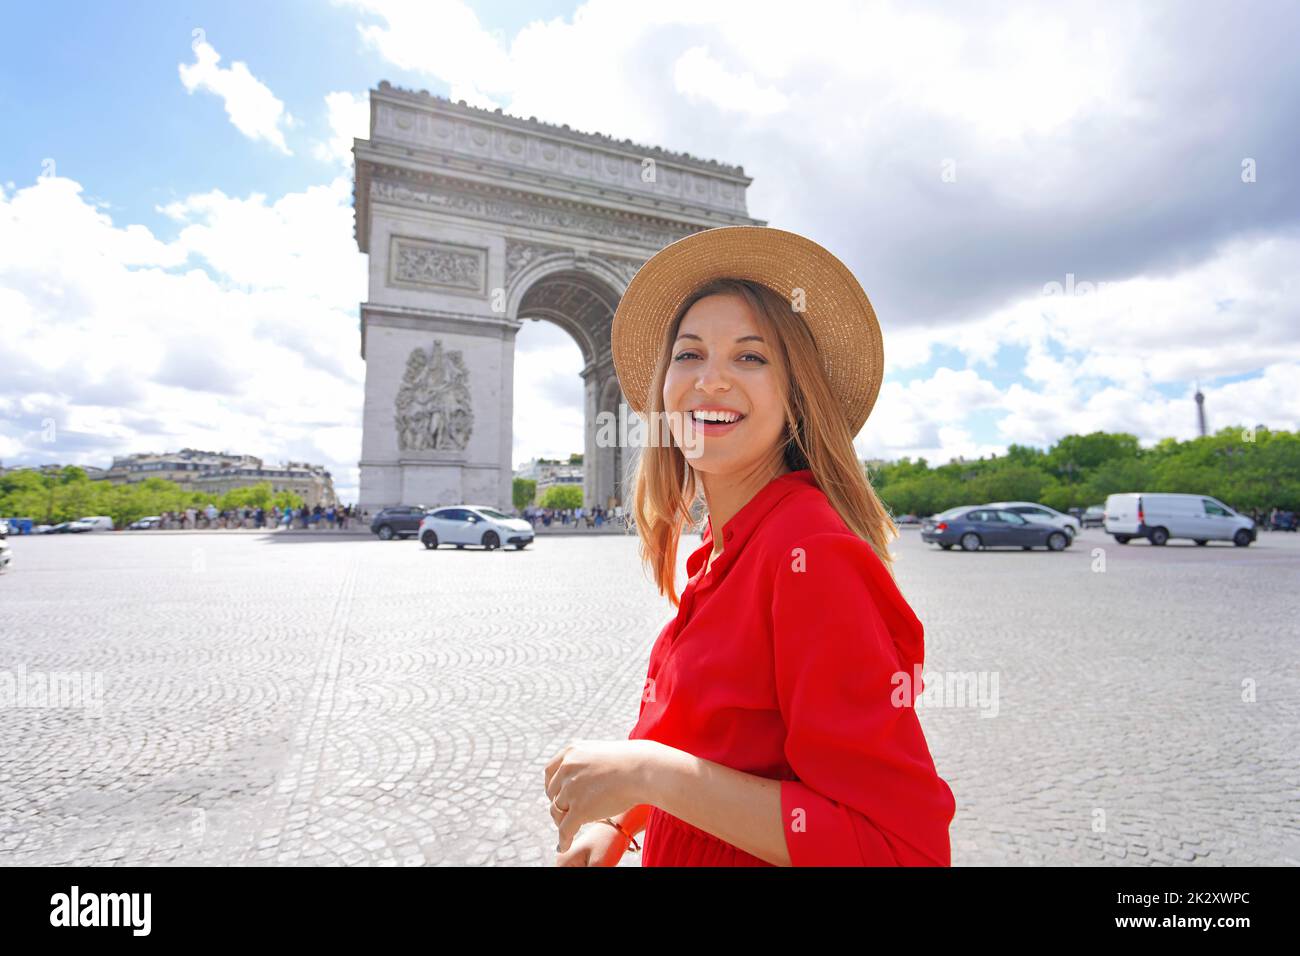 Portrait of young fashion woman walking in Paris with Arc de Triomphe, France Stock Photo